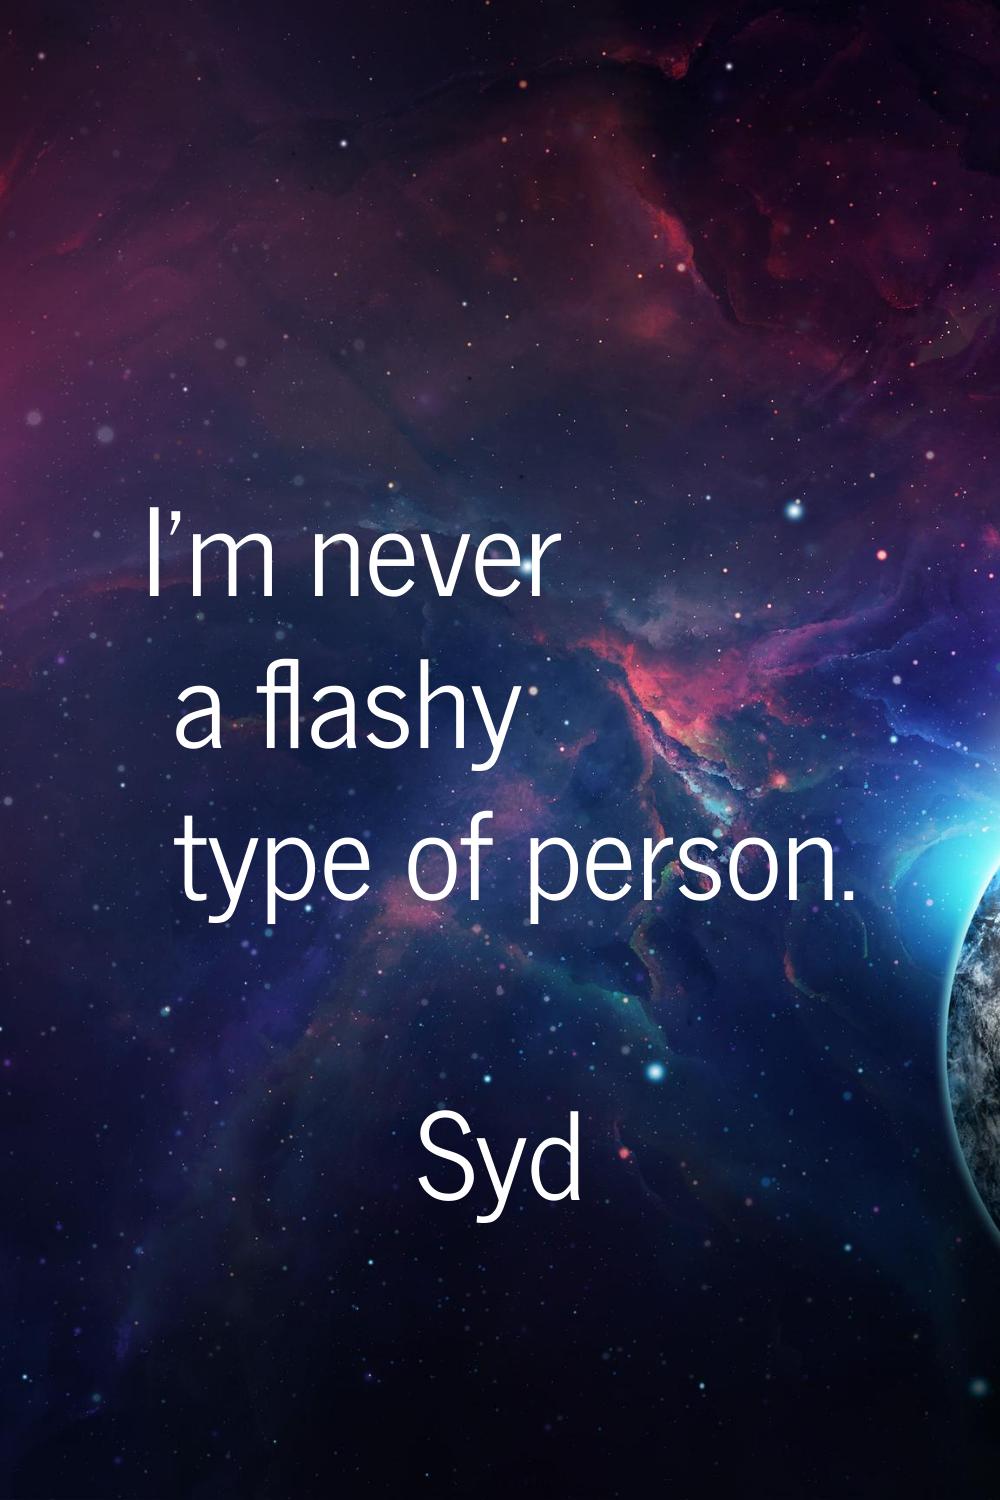 I'm never a flashy type of person.